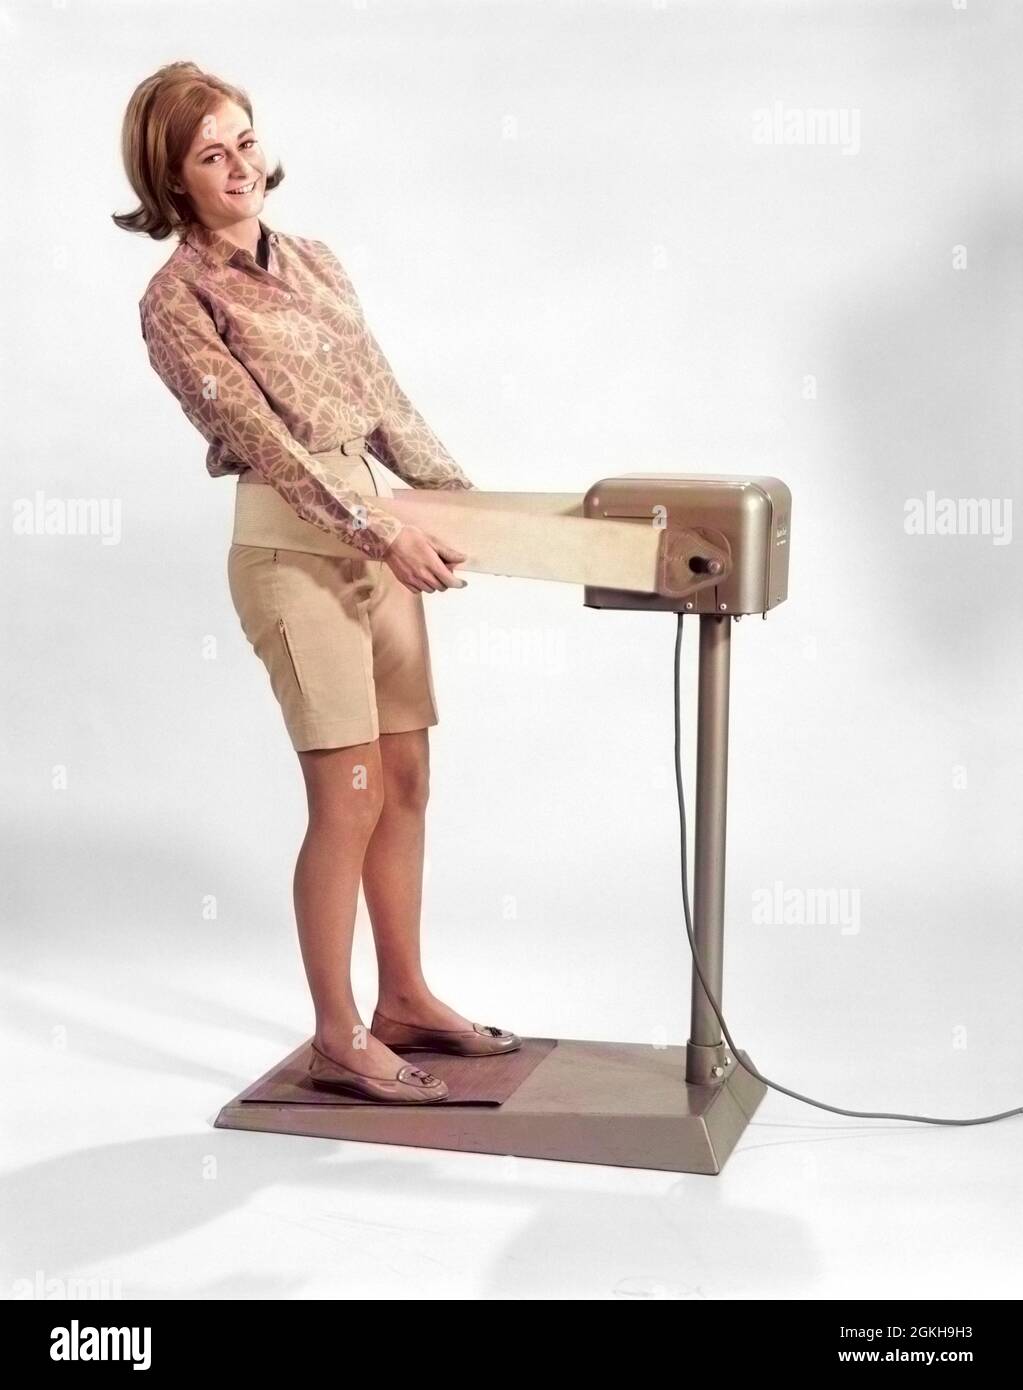 1960s SMILING YOUNG WOMAN STANDING ON WEIGHT REDUCING VIBRATING EXERCISE MACHINE LOOKING AT CAMERA - g6509c HAR001 HARS PERSONS GROWN-UP EYE CONTACT HIPS HAPPINESS WELLNESS RECREATION VIBRATING VIBRATE GOOD HEALTH BERMUDA SHORTS REDUCING DEVICE ELECTRONIC SPORTS GYMNASTICS YOUNG ADULT WOMAN CAUCASIAN ETHNICITY HAR001 OLD FASHIONED Stock Photo